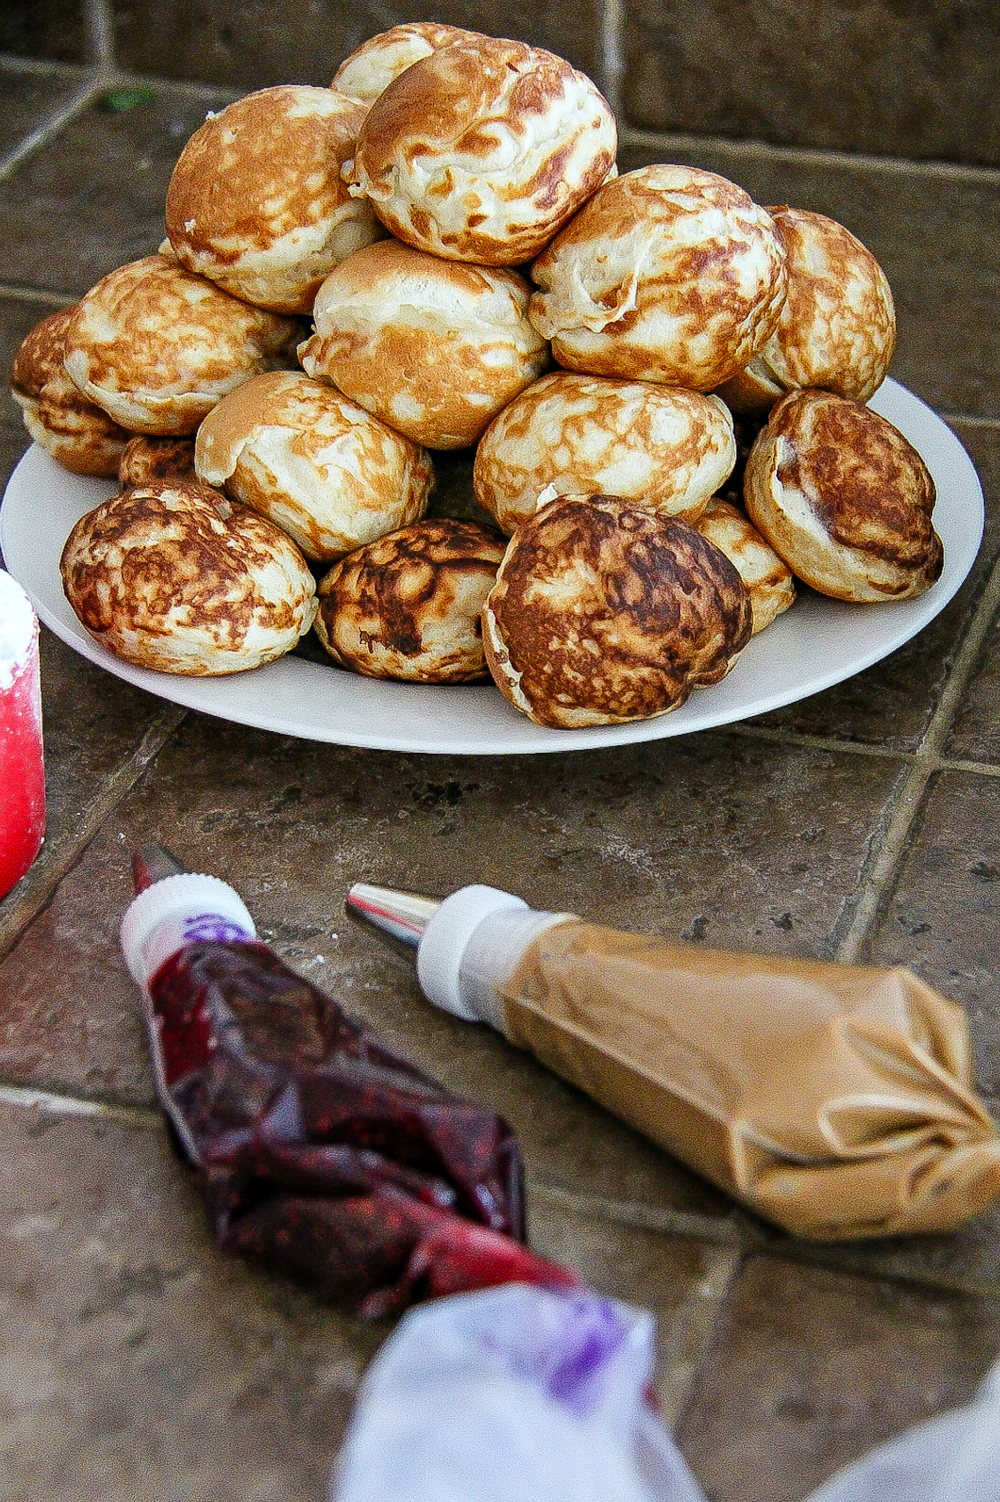 Peanut Butter and Jelly Filled Pancakes are perfect for Sunday brunch